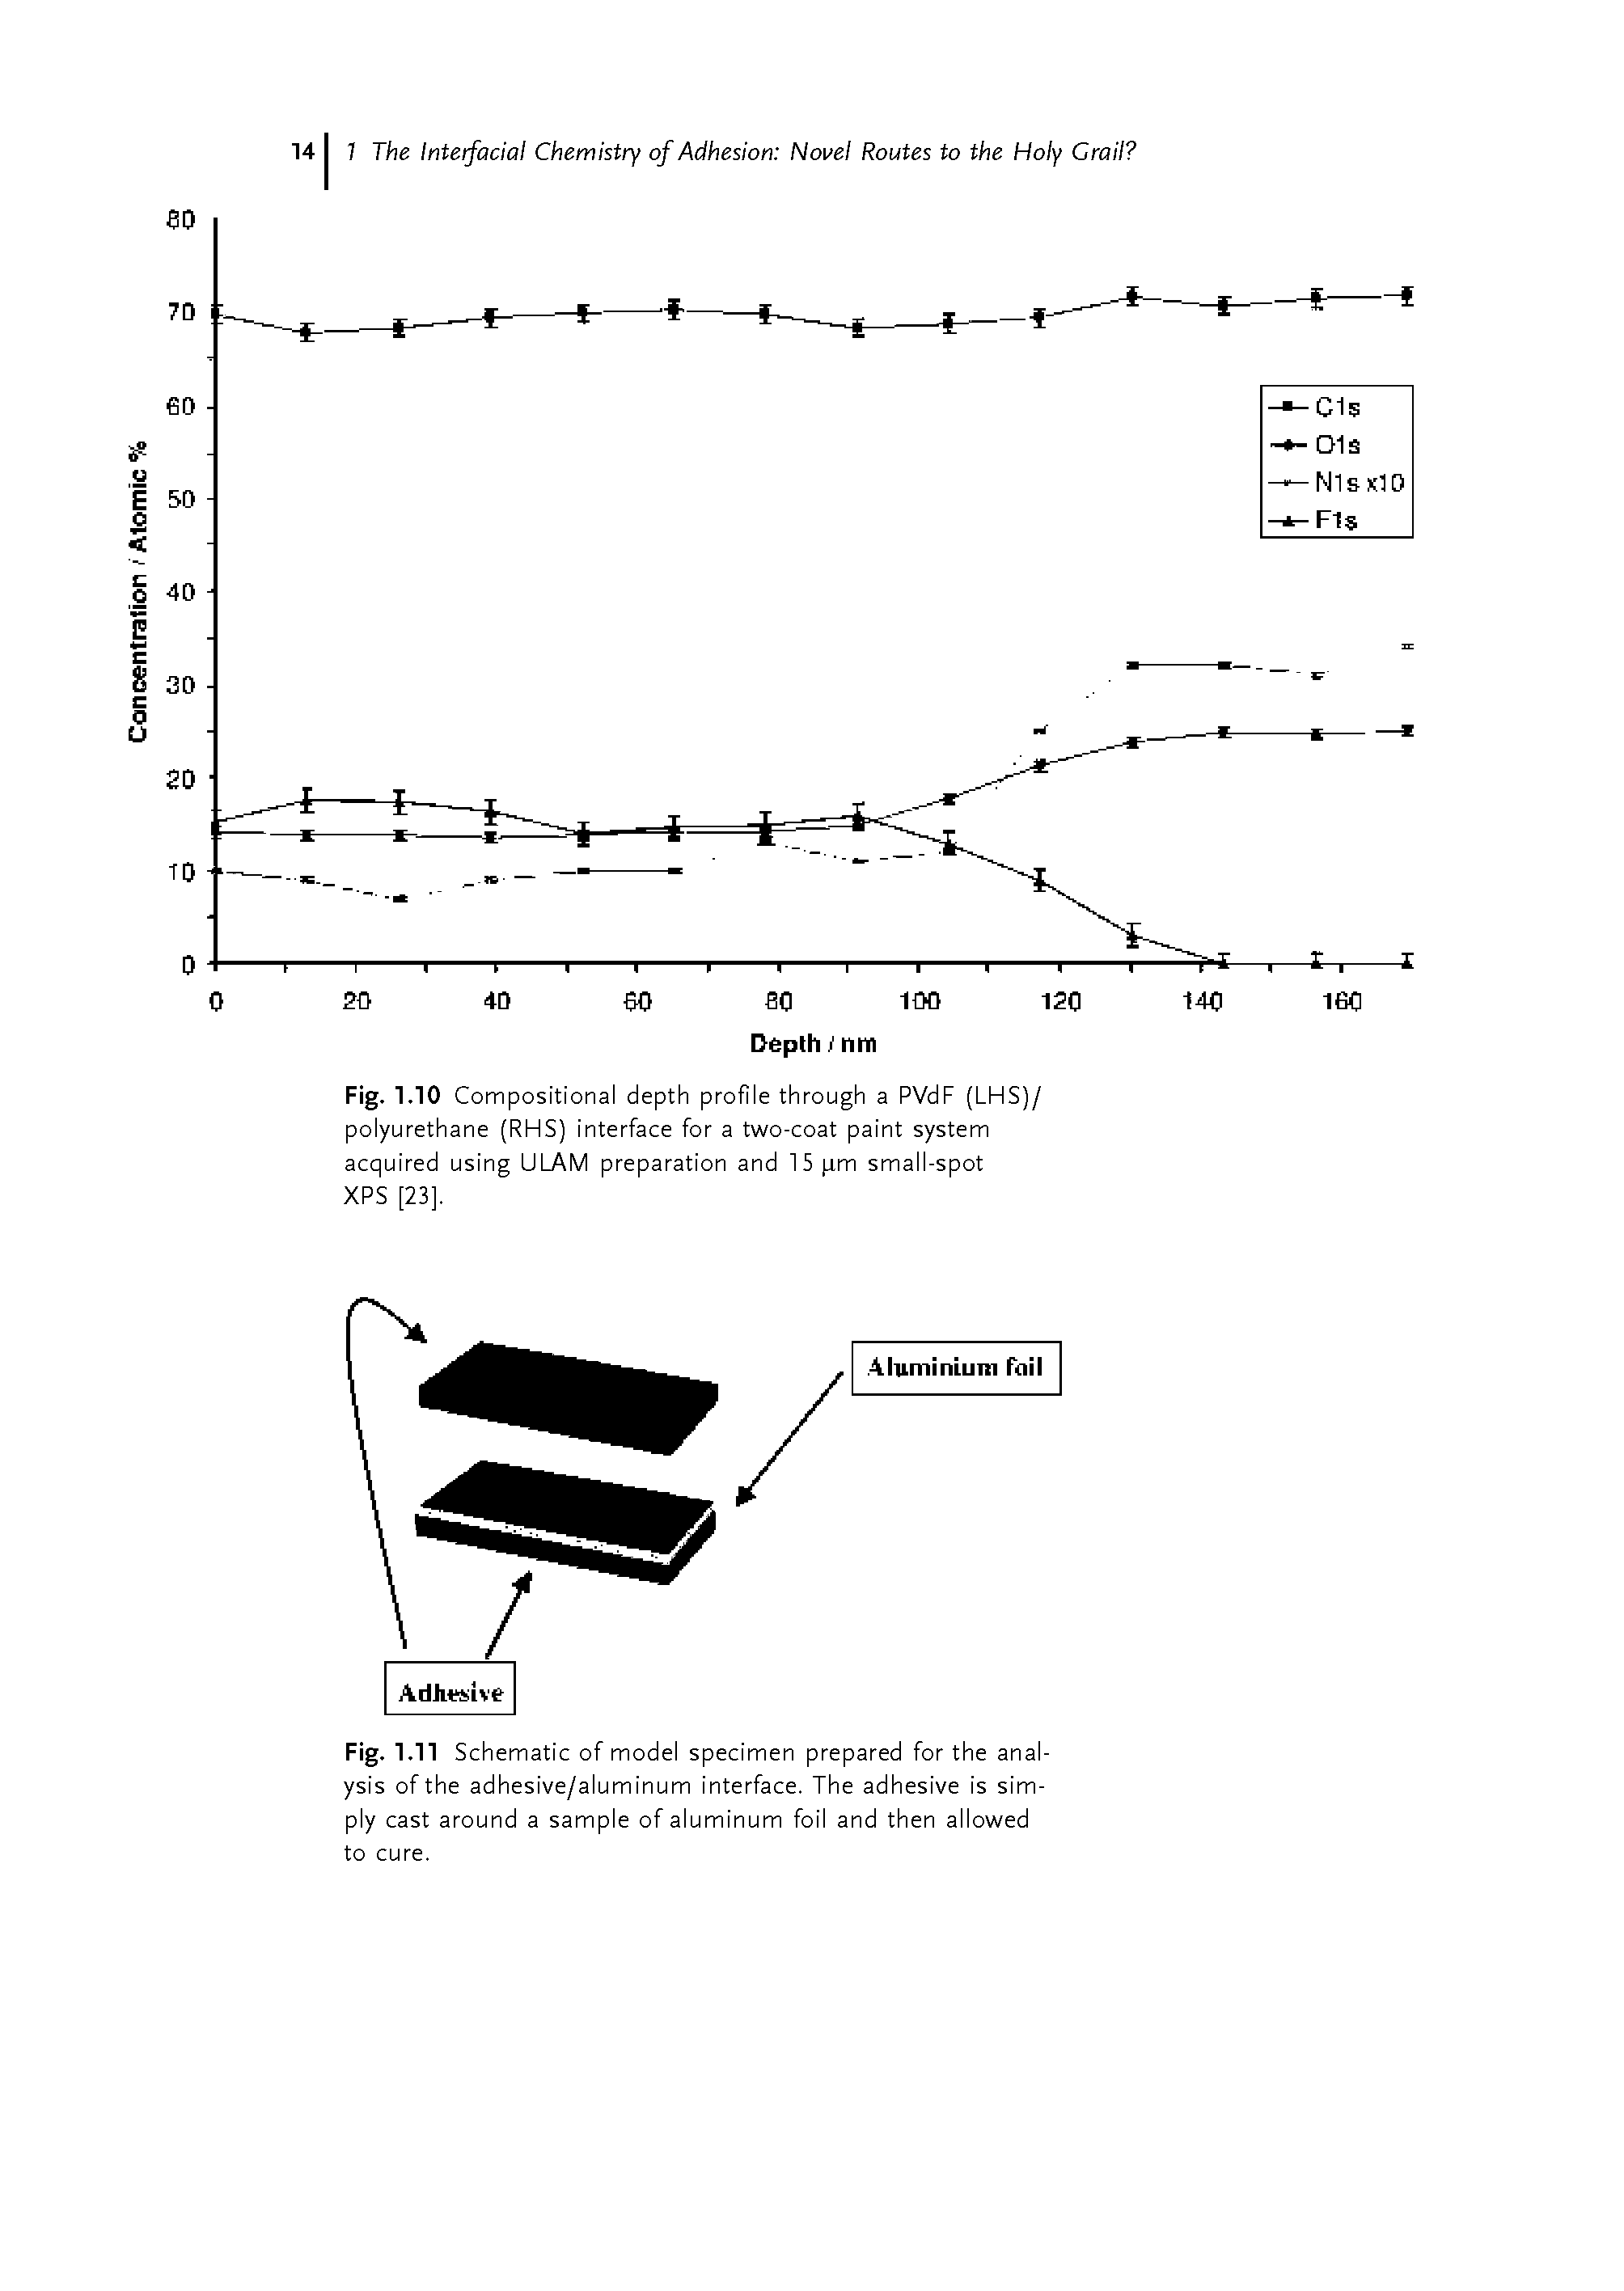 Fig. 1.11 Schematic of model specimen prepared for the analysis of the adhesive/aluminum interface. The adhesive is simply cast around a sample of aluminum foil and then allowed to cure.